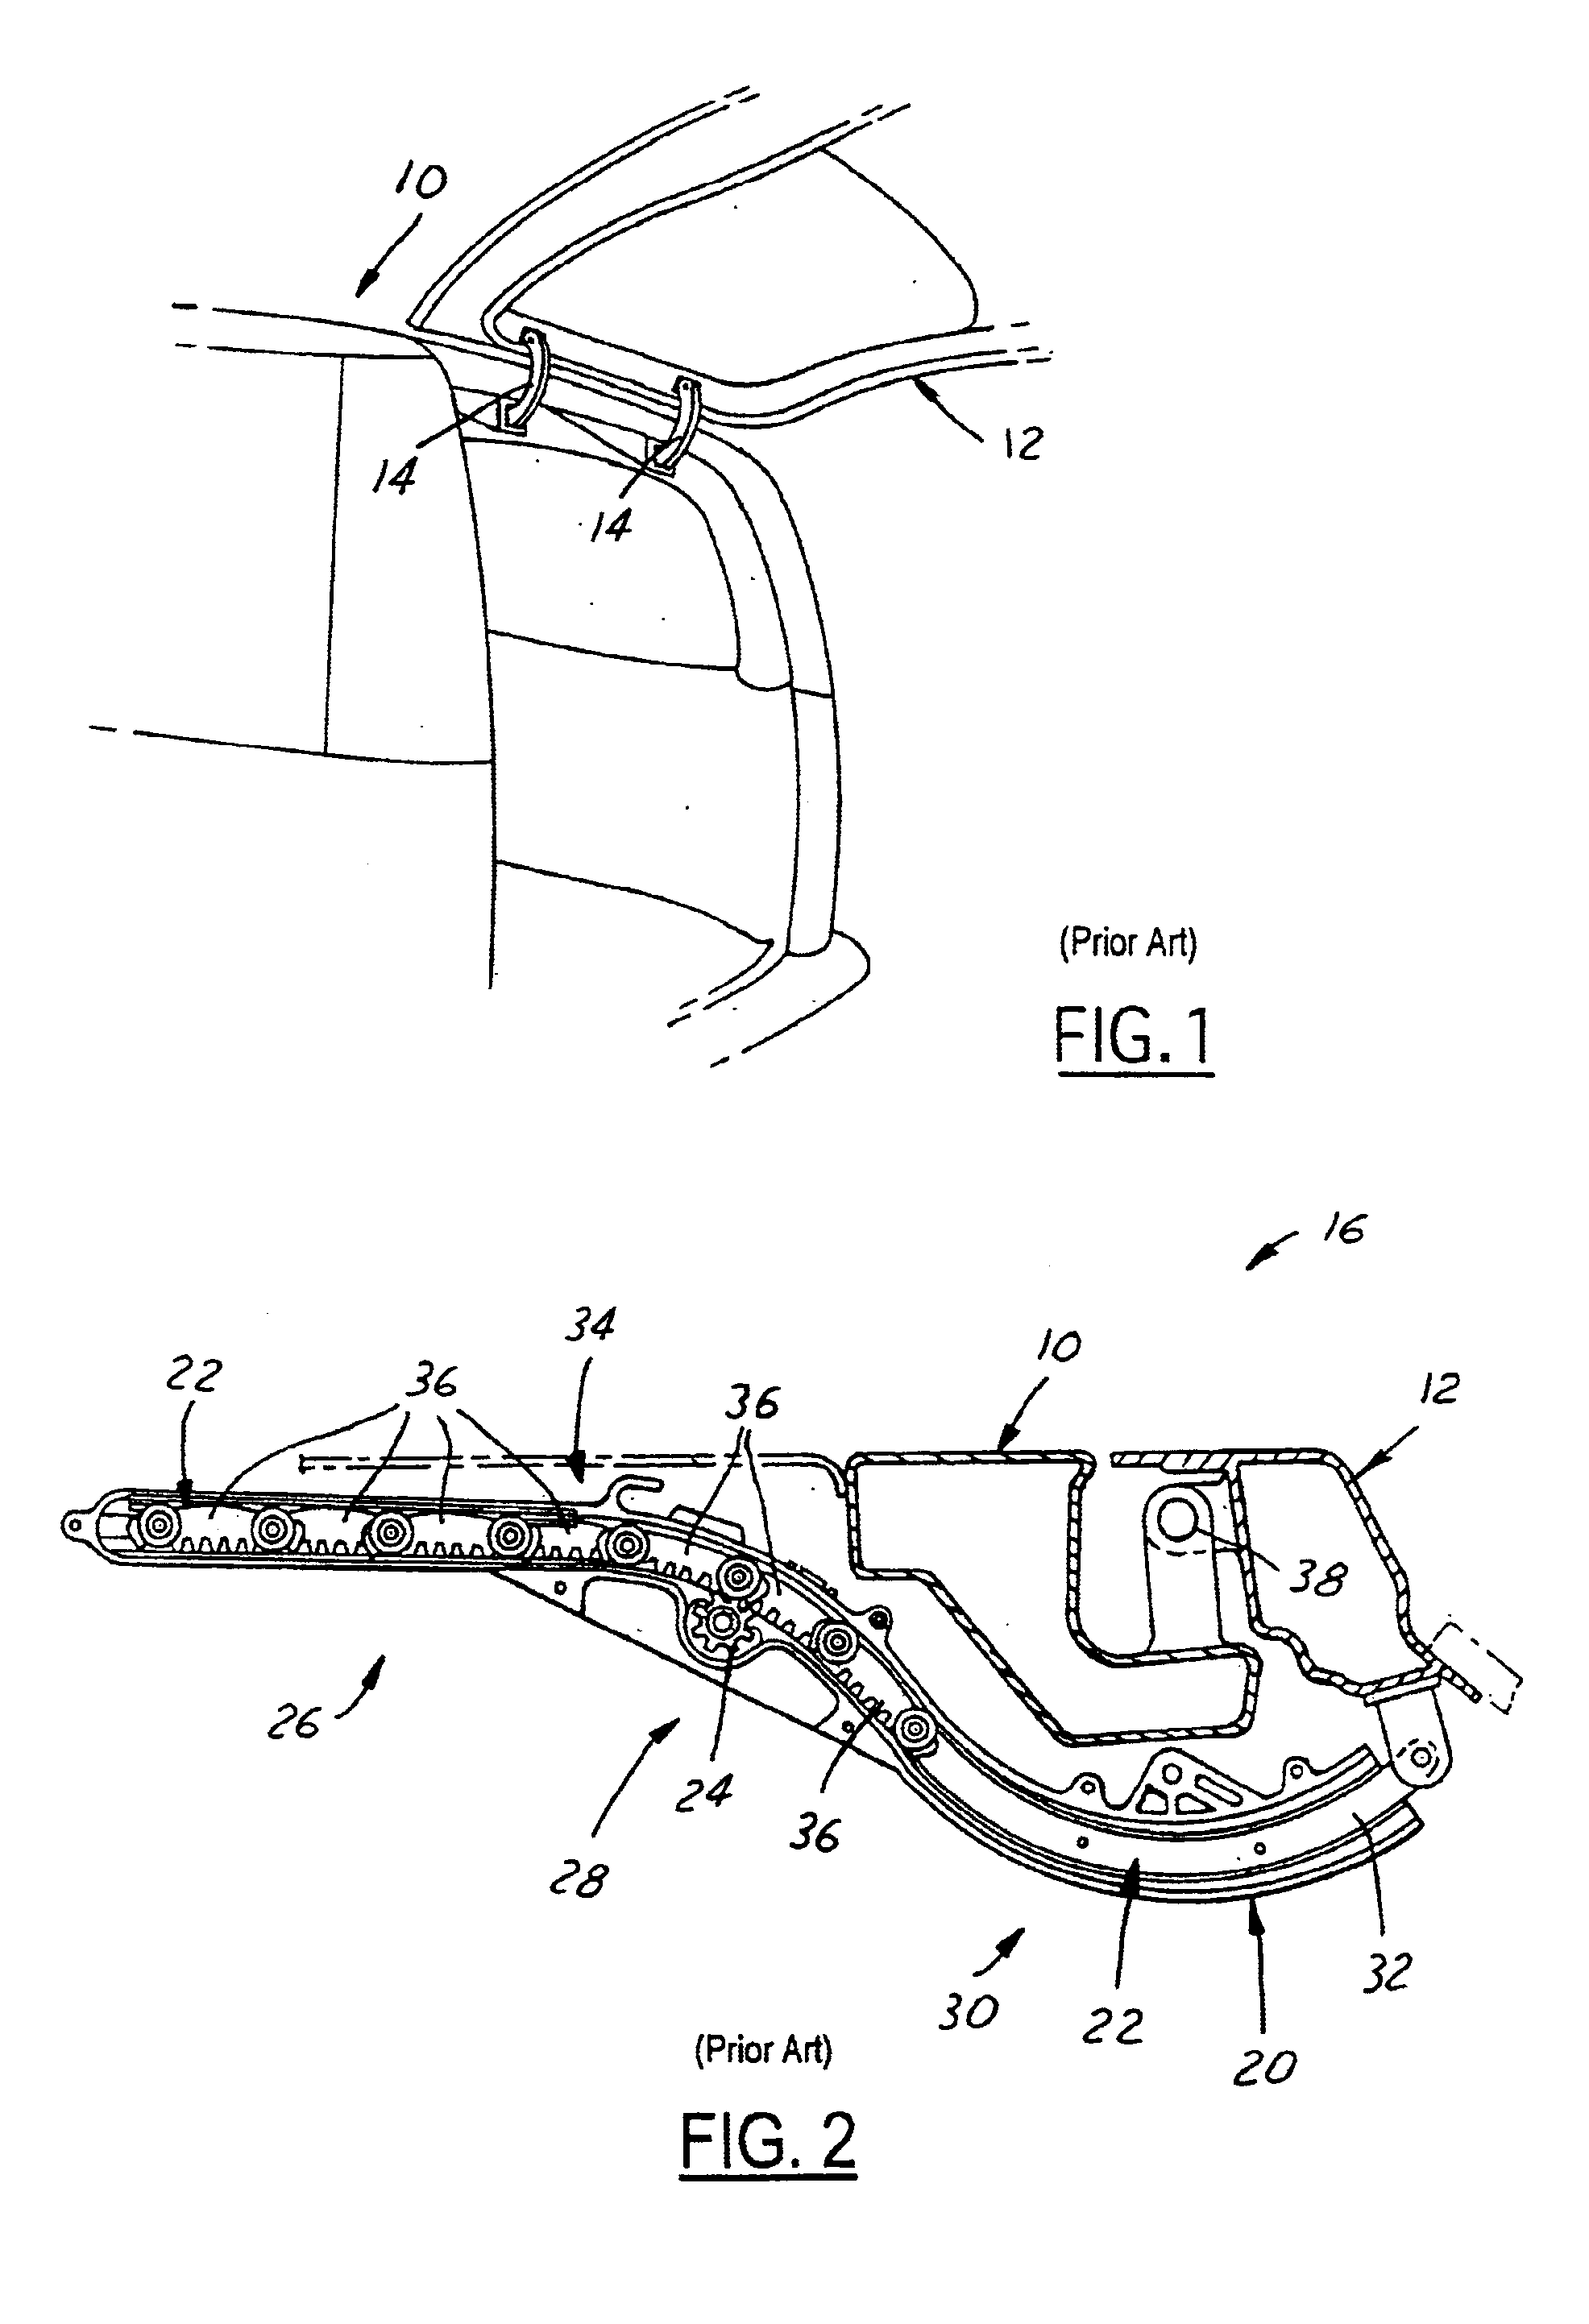 Electronic position sensor for power operated accessory